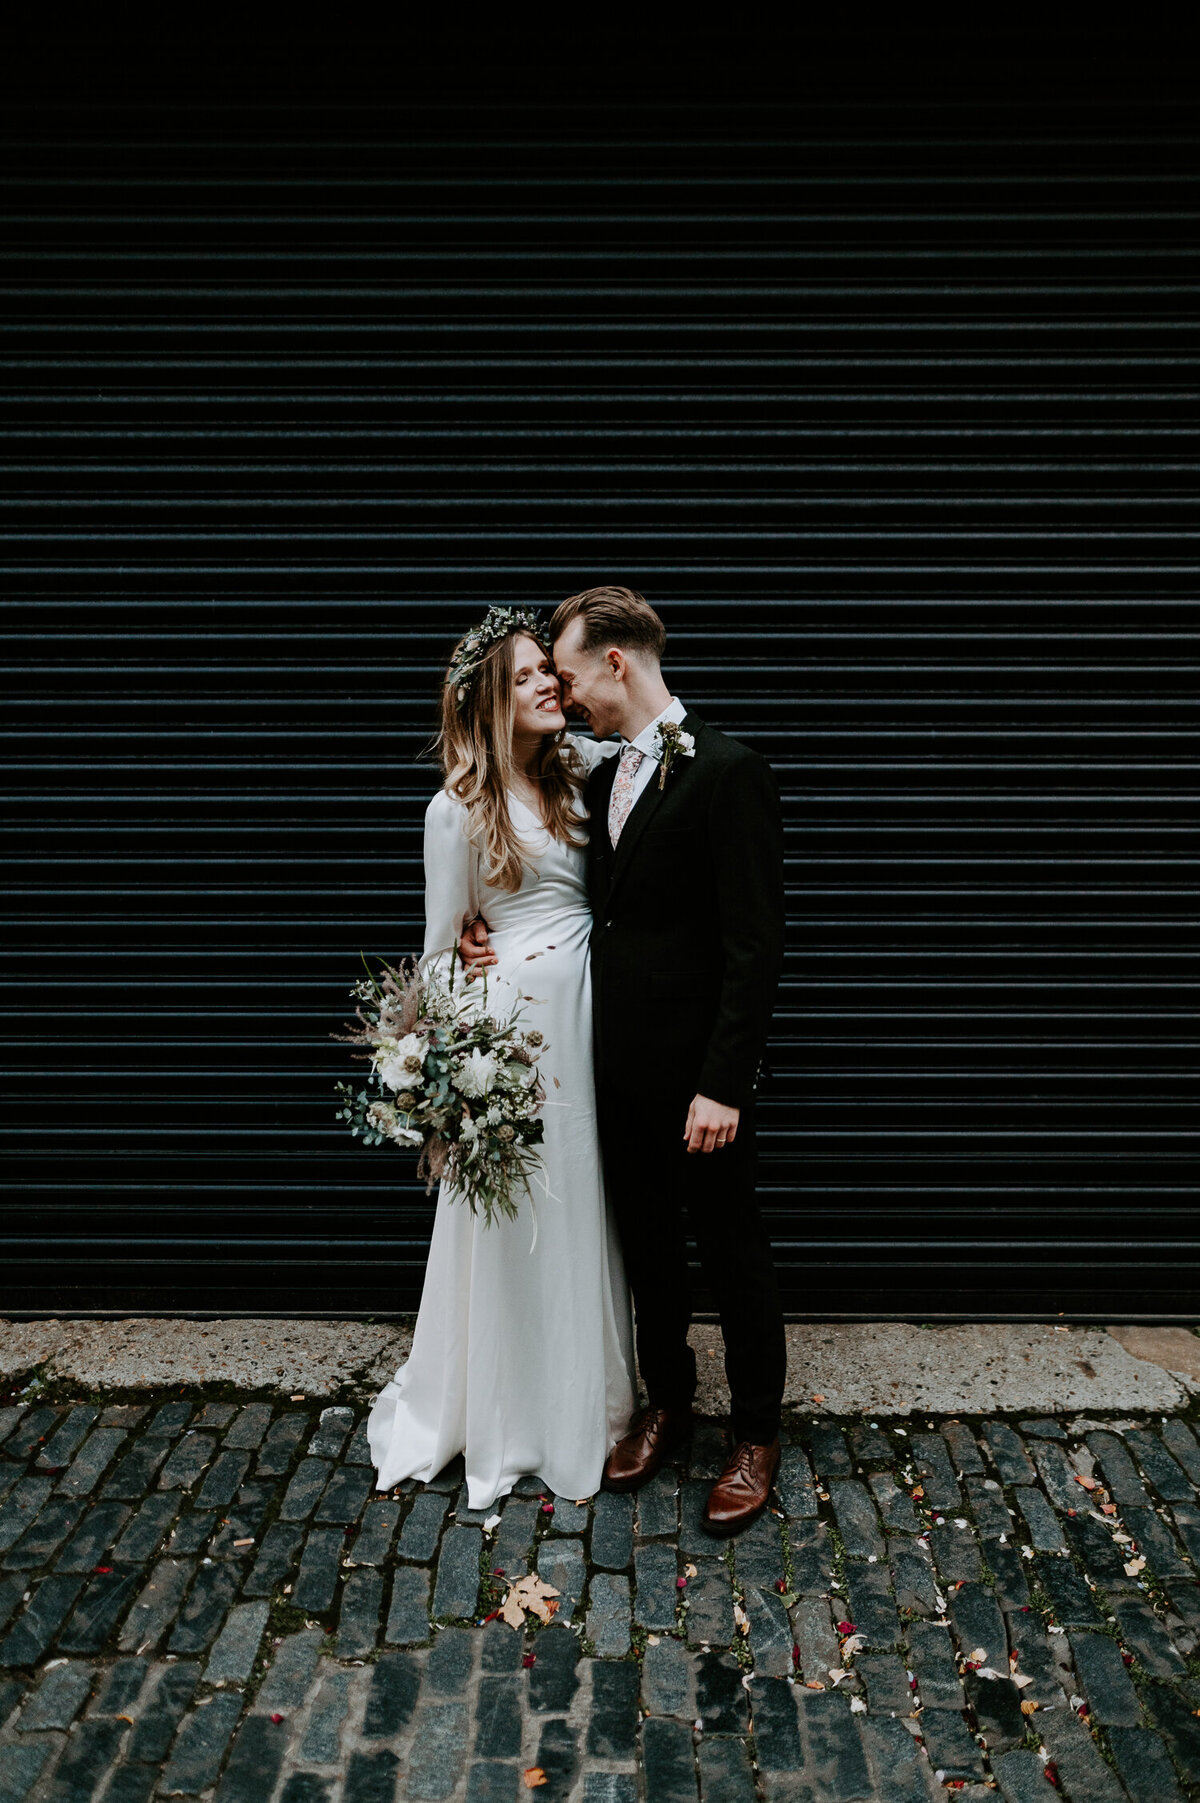 Clapton Country Club has some cool places for couples portraits. Black shutters and white brick walls are just some of the cool photo spots. The ceremony has some amazing natural light which is perfect for summer weddings.